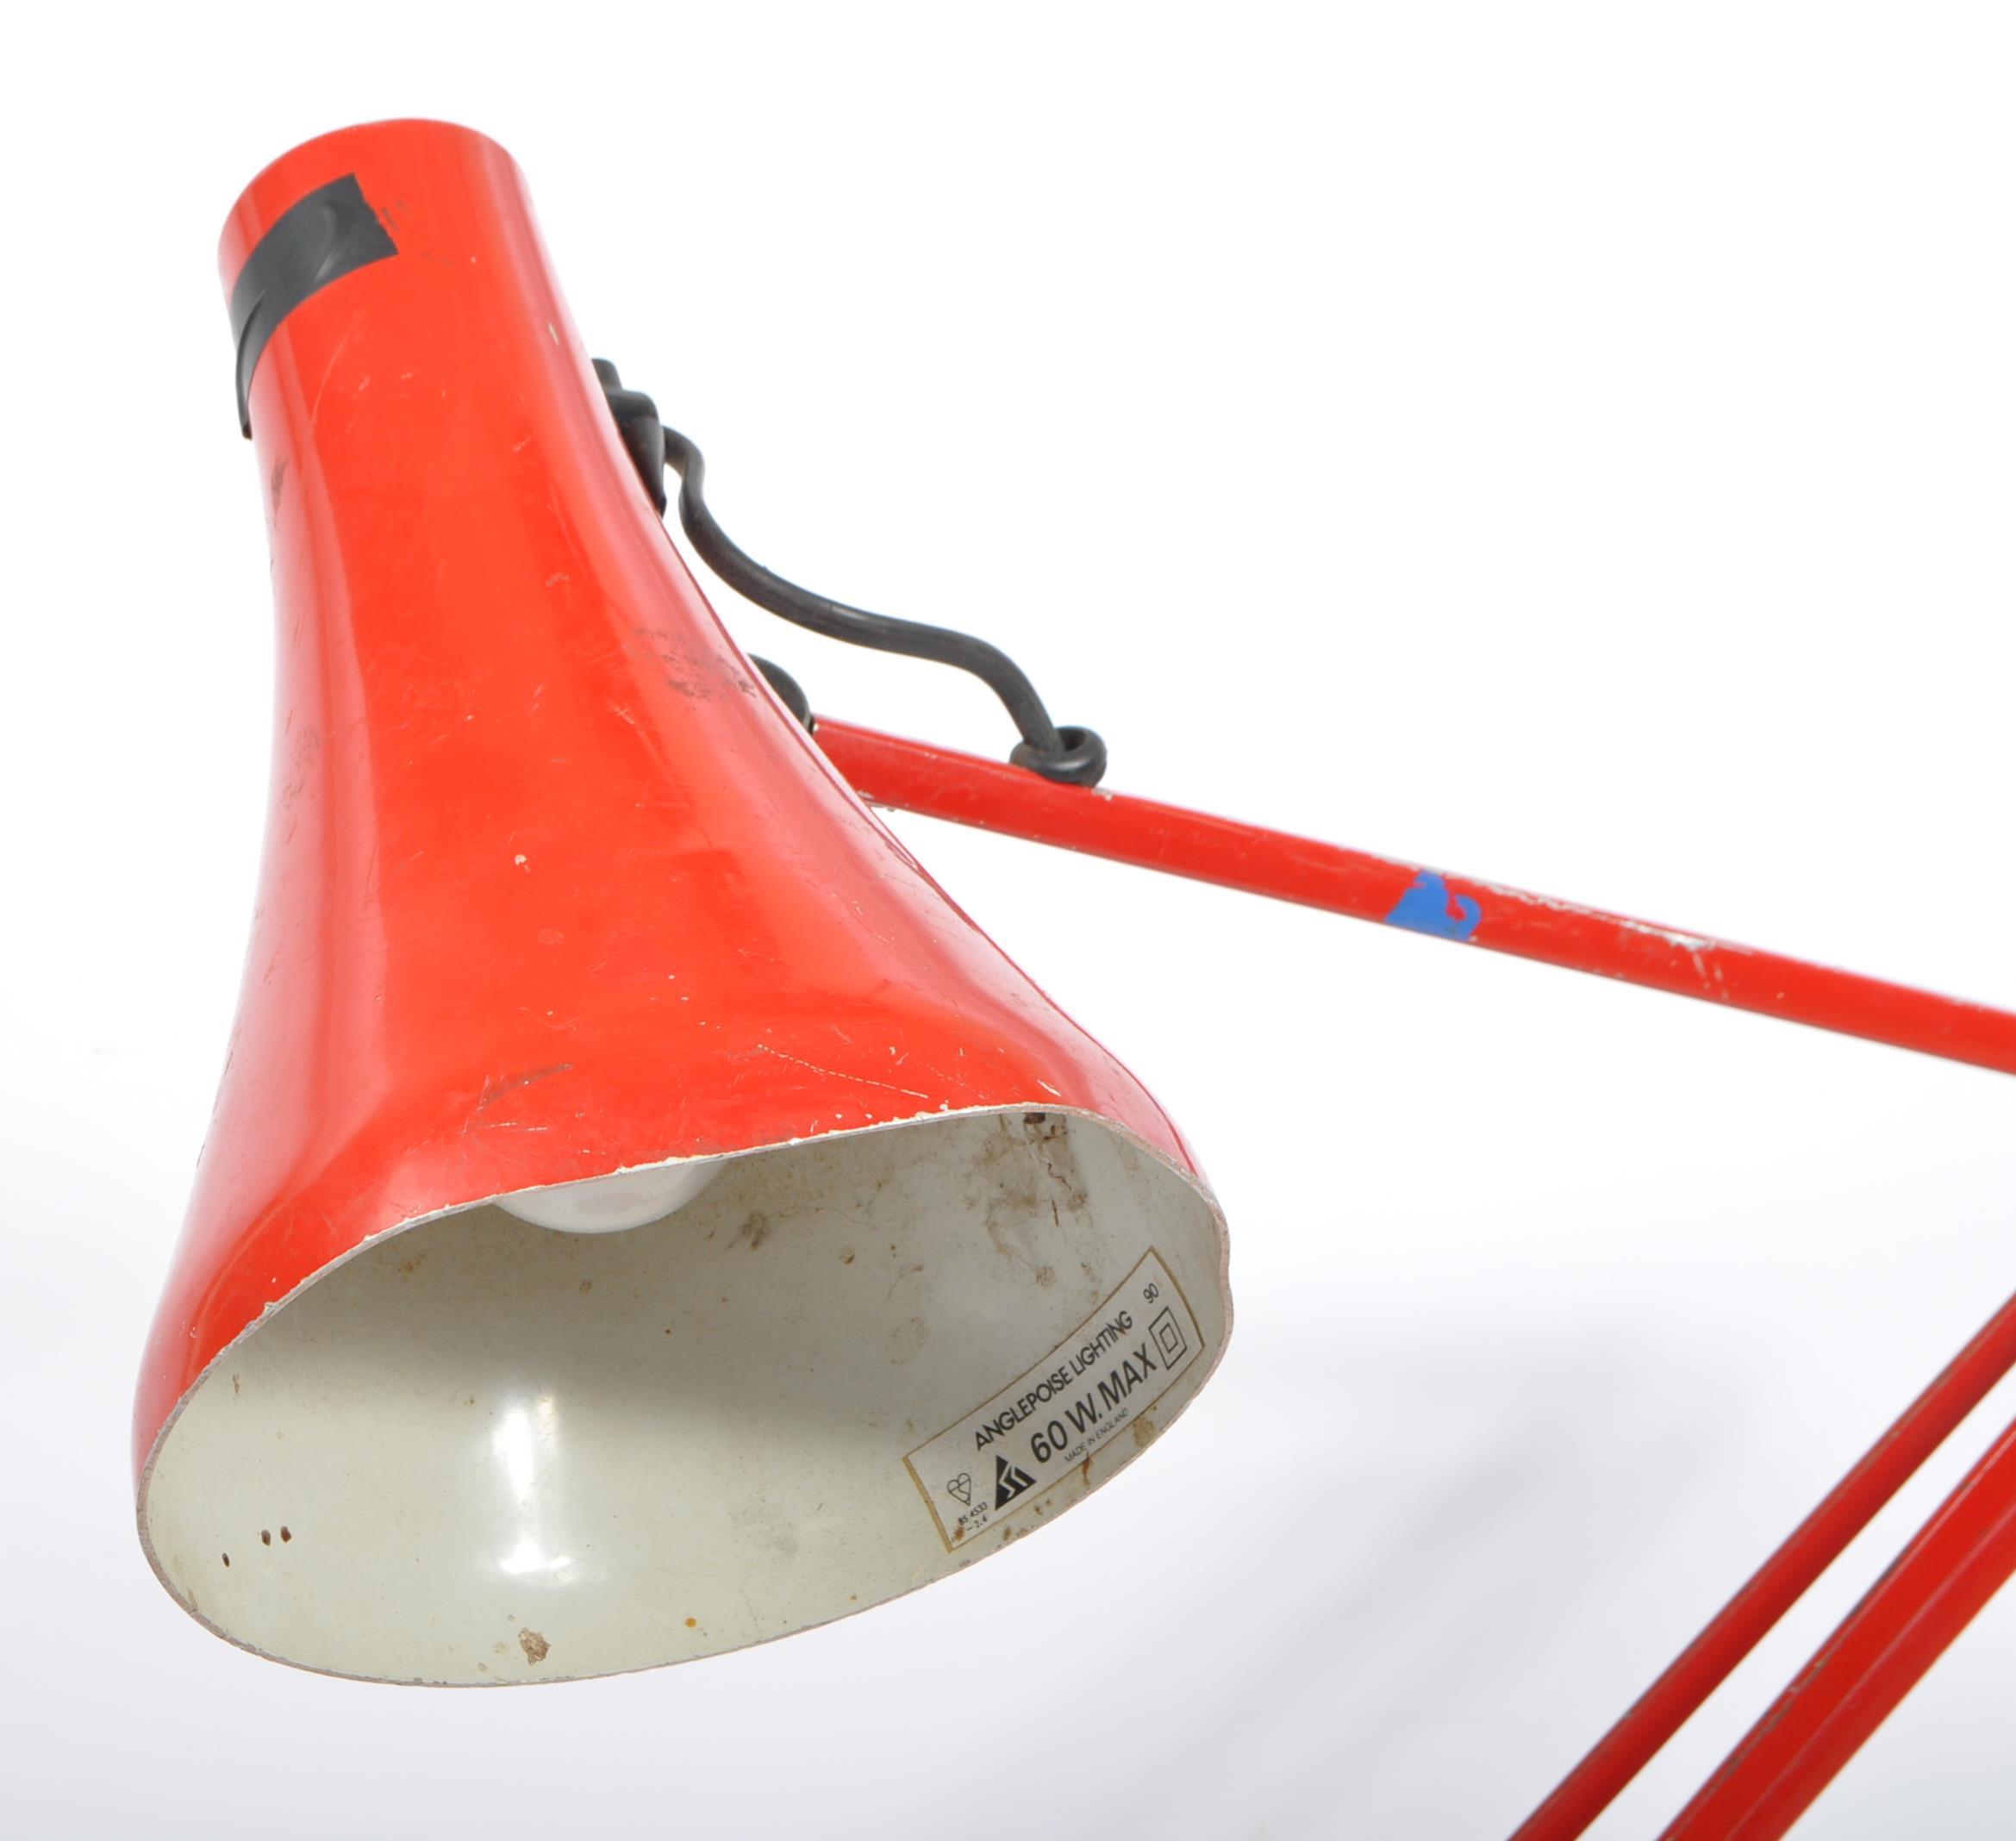 MID 20TH CENTURY ANGLEPOISE DESK TOP LAMP - Image 2 of 4